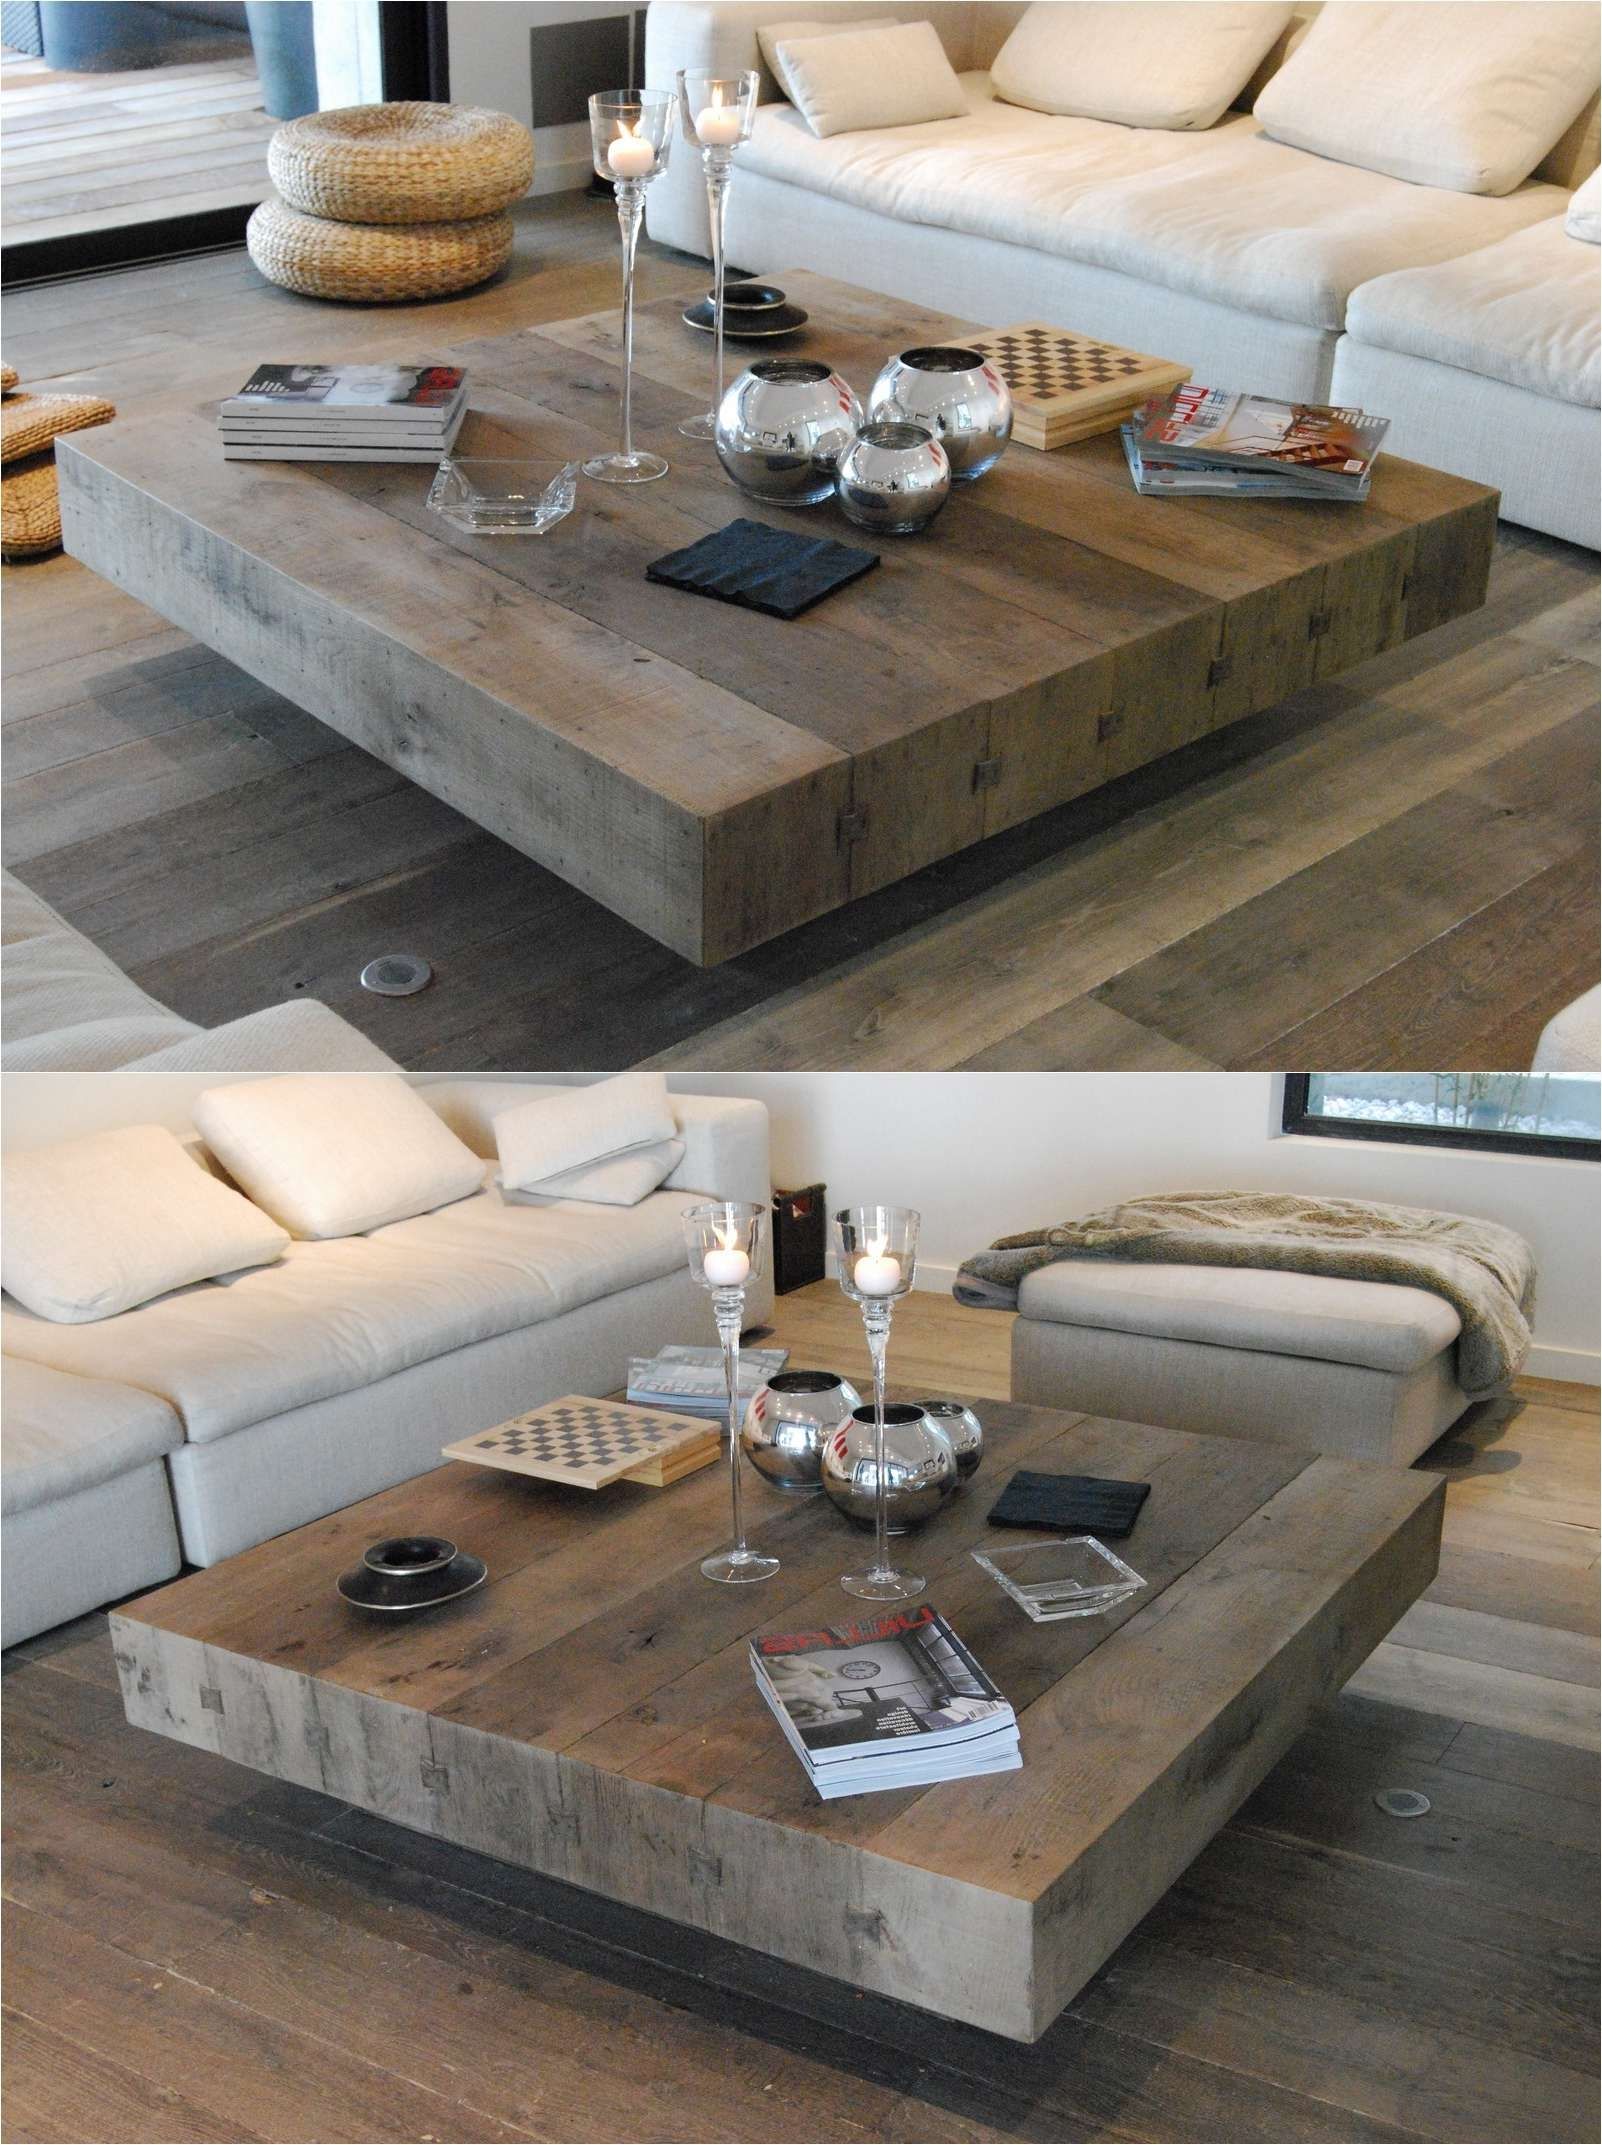 Diy Coffee Table Trunk Interesting Photo Ideas ~ Idolza Within Best And Newest Verona Coffee Tables (View 15 of 20)